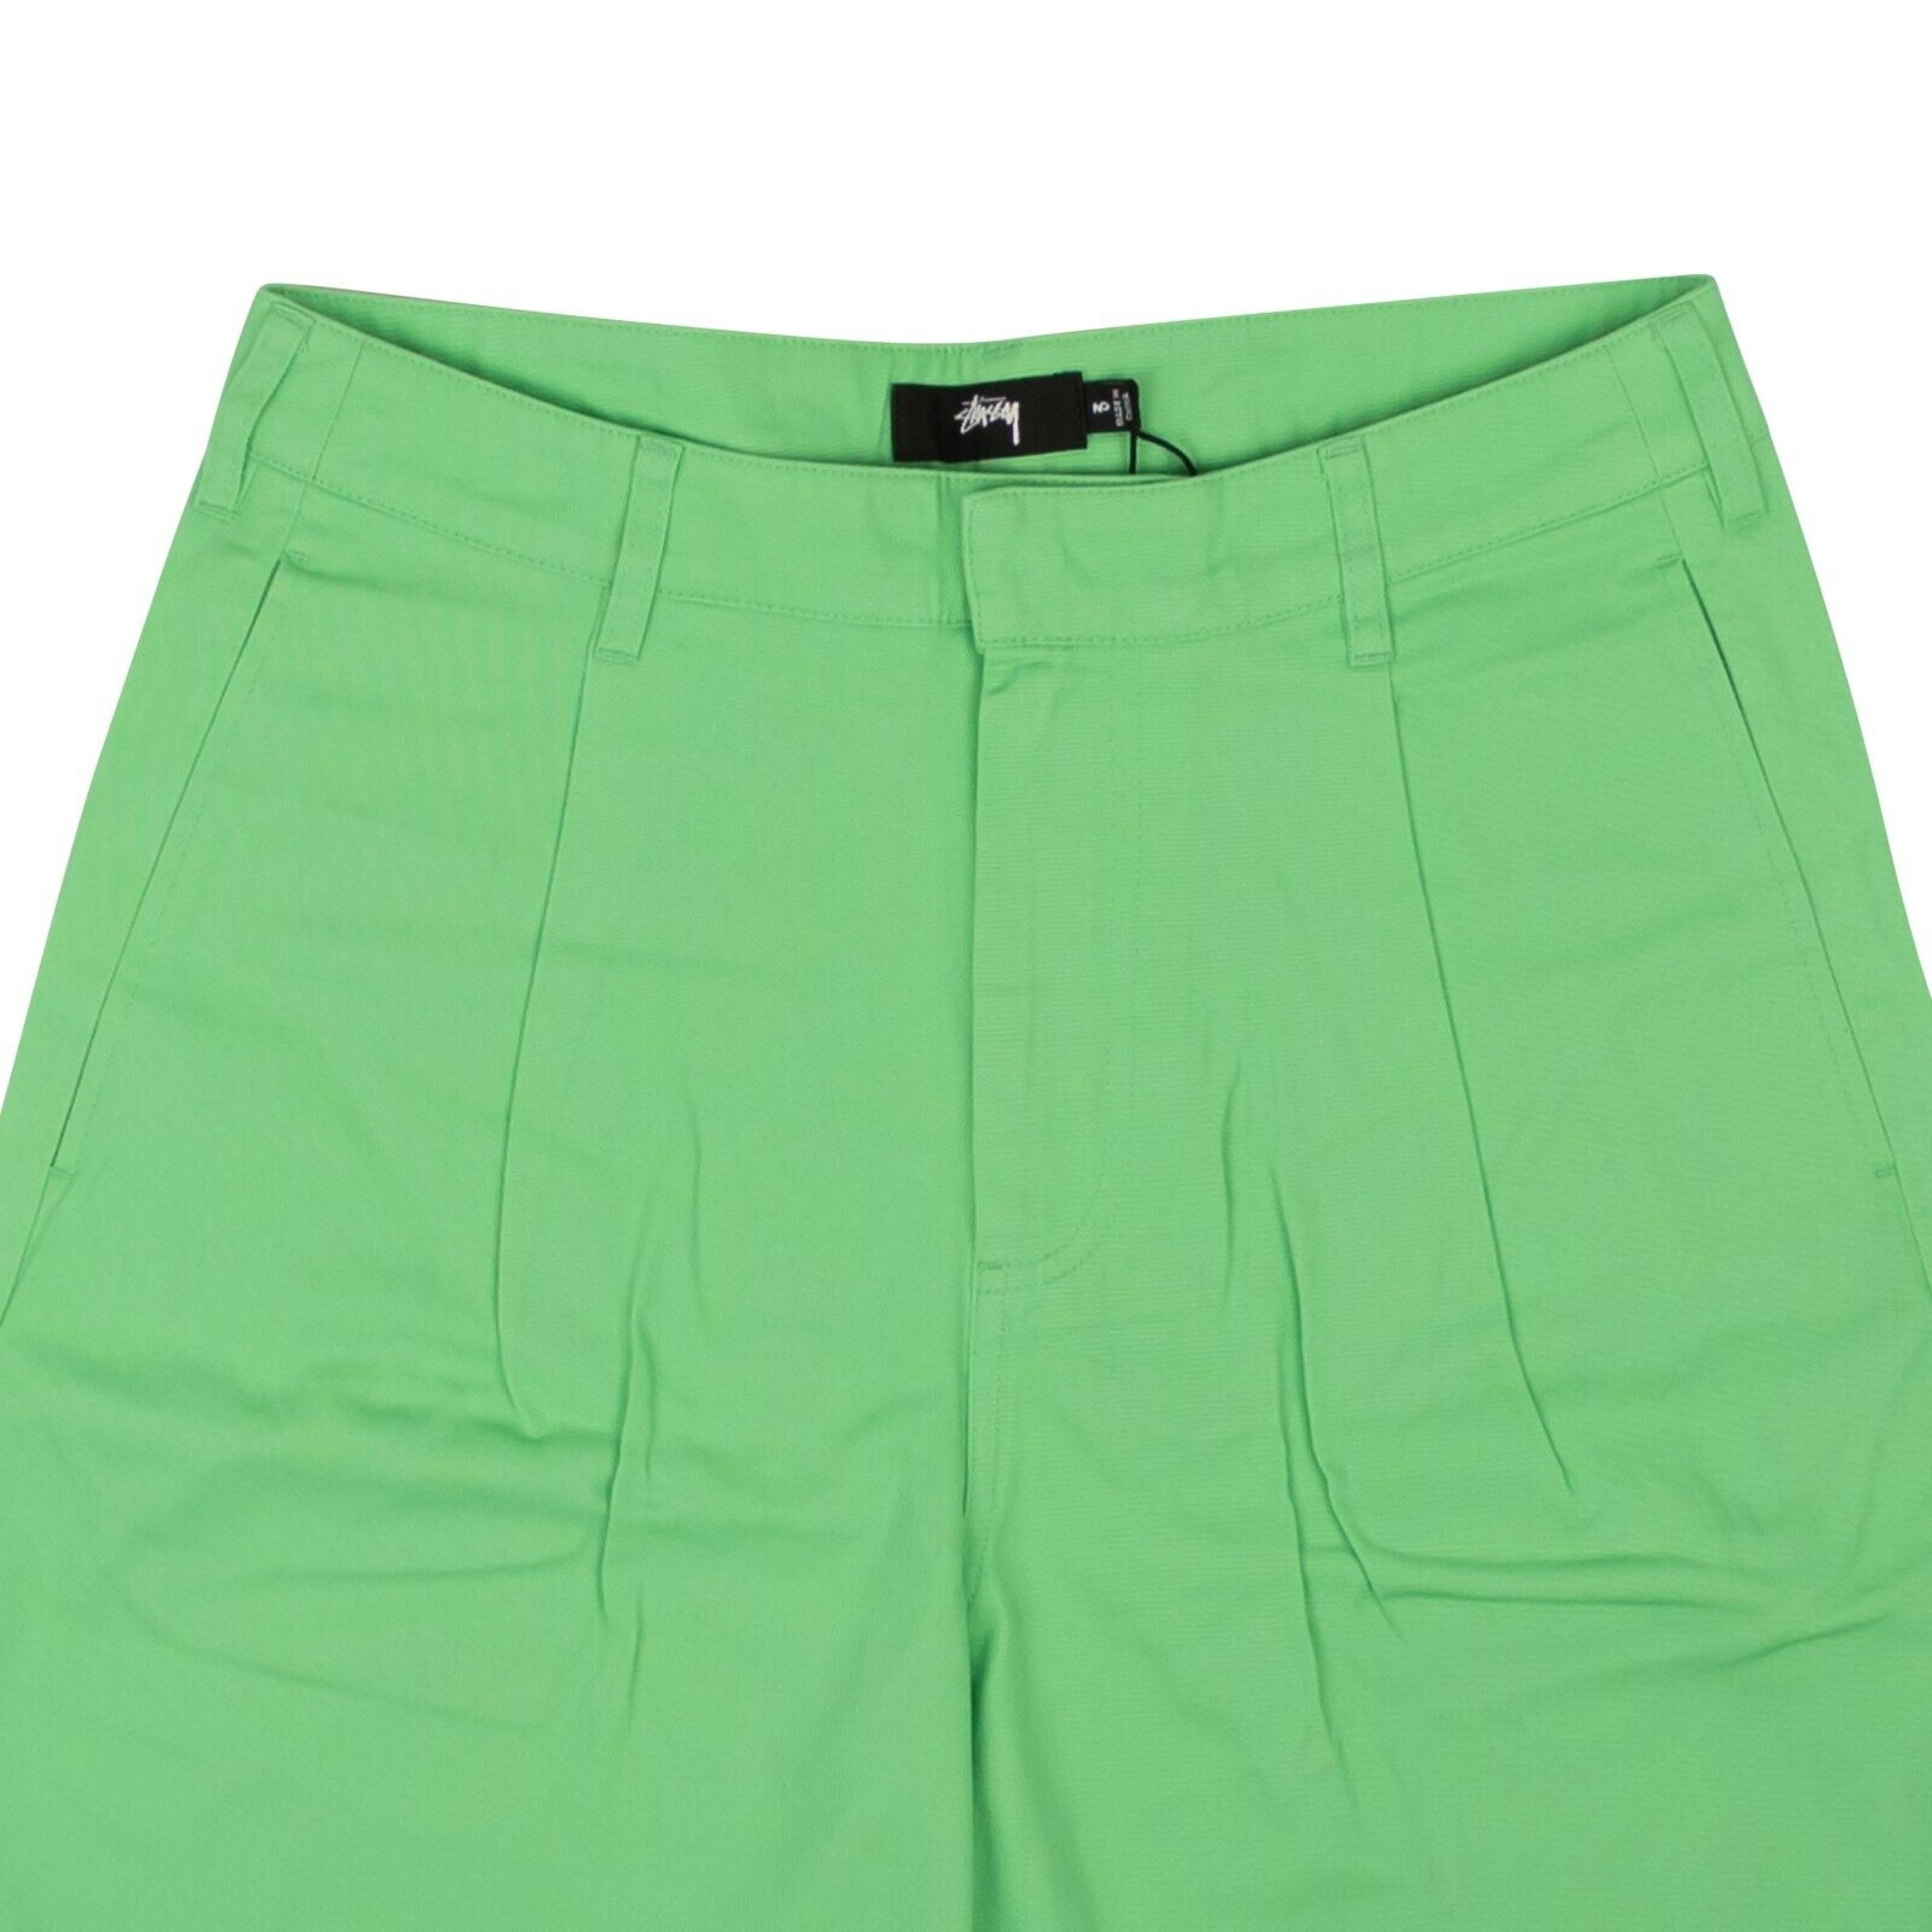 Alternate View 1 of Green Cotton Lee Baggy High Rise Shorts